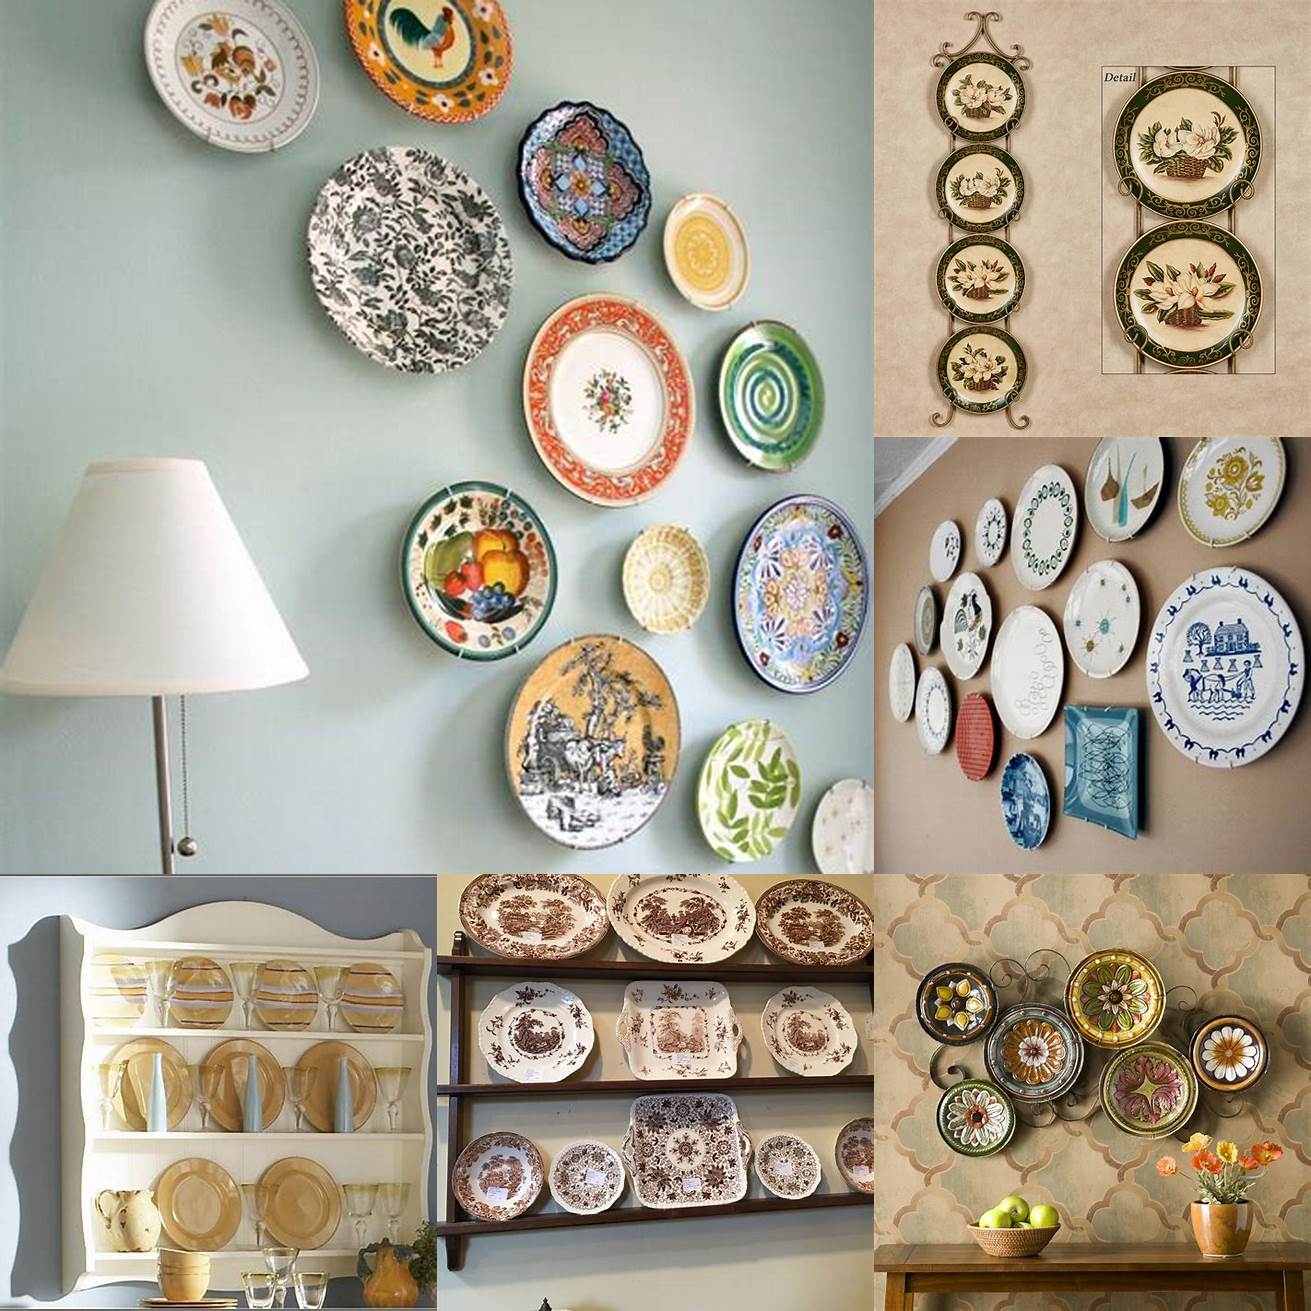 6 Display decorative plates or other kitchen-themed decor on top of your cabinets